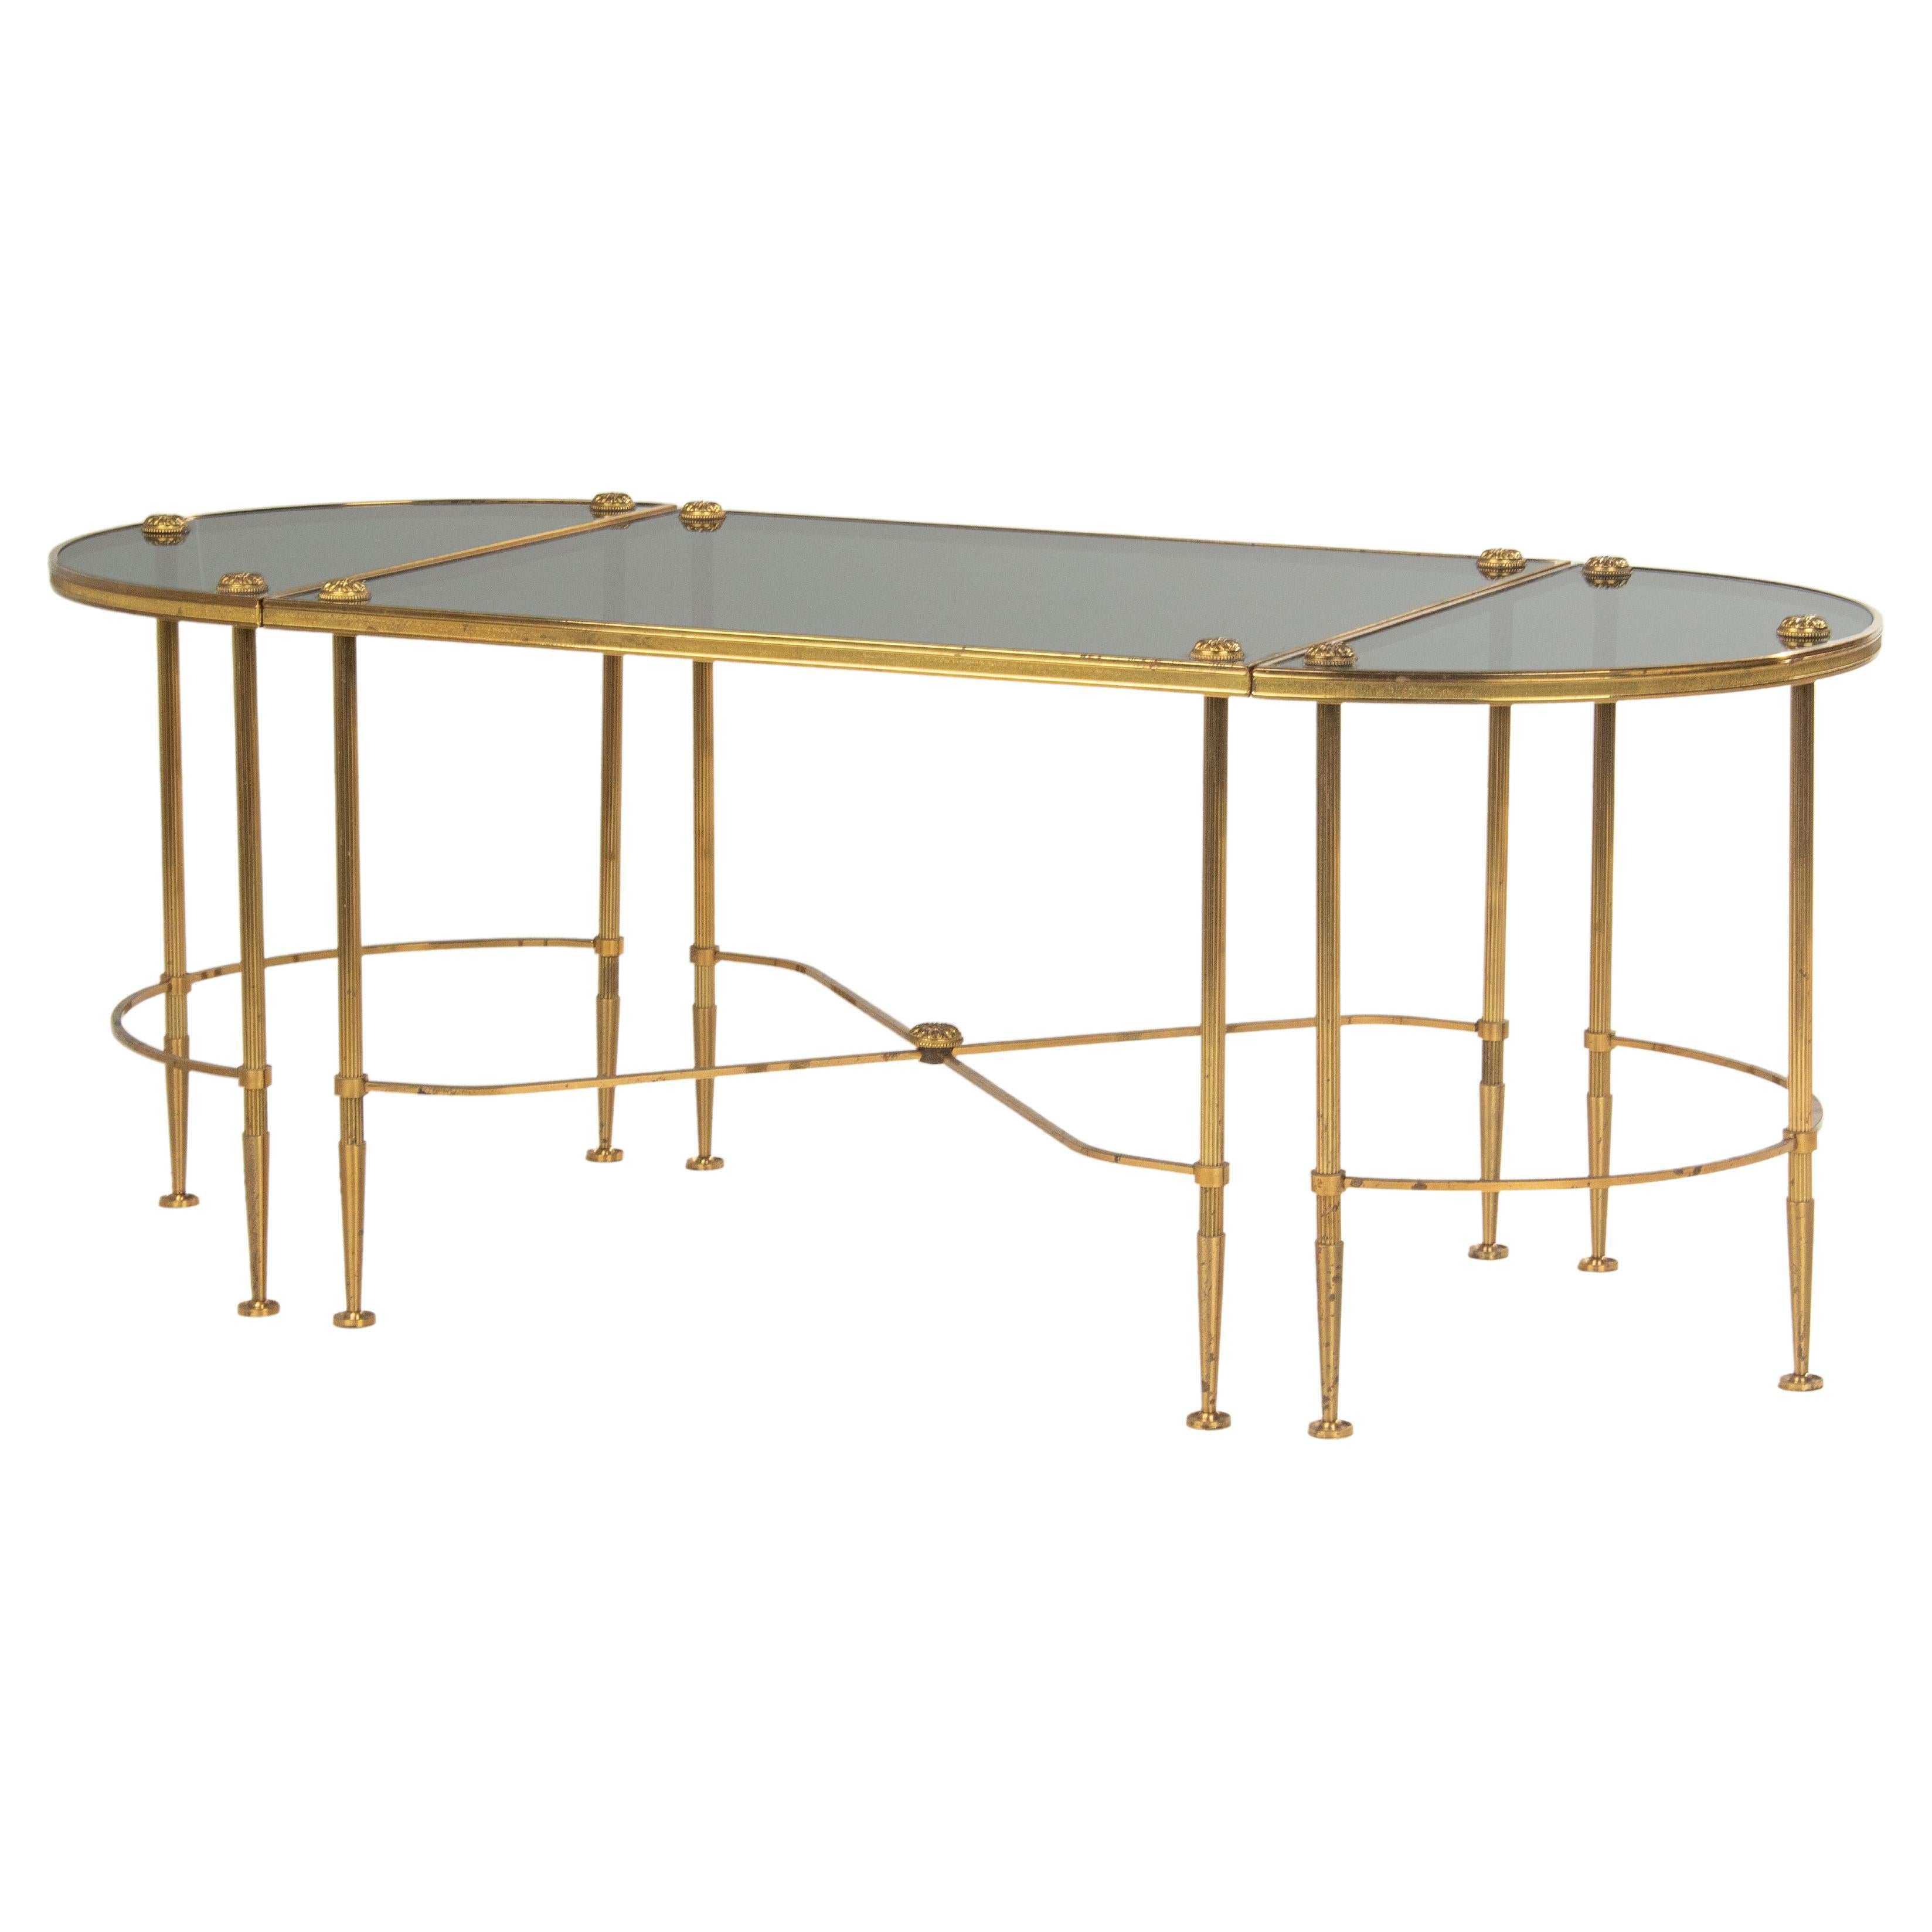 Mid-20th Century Brass Demilune Coffee Table Maison Bagues Style For Sale